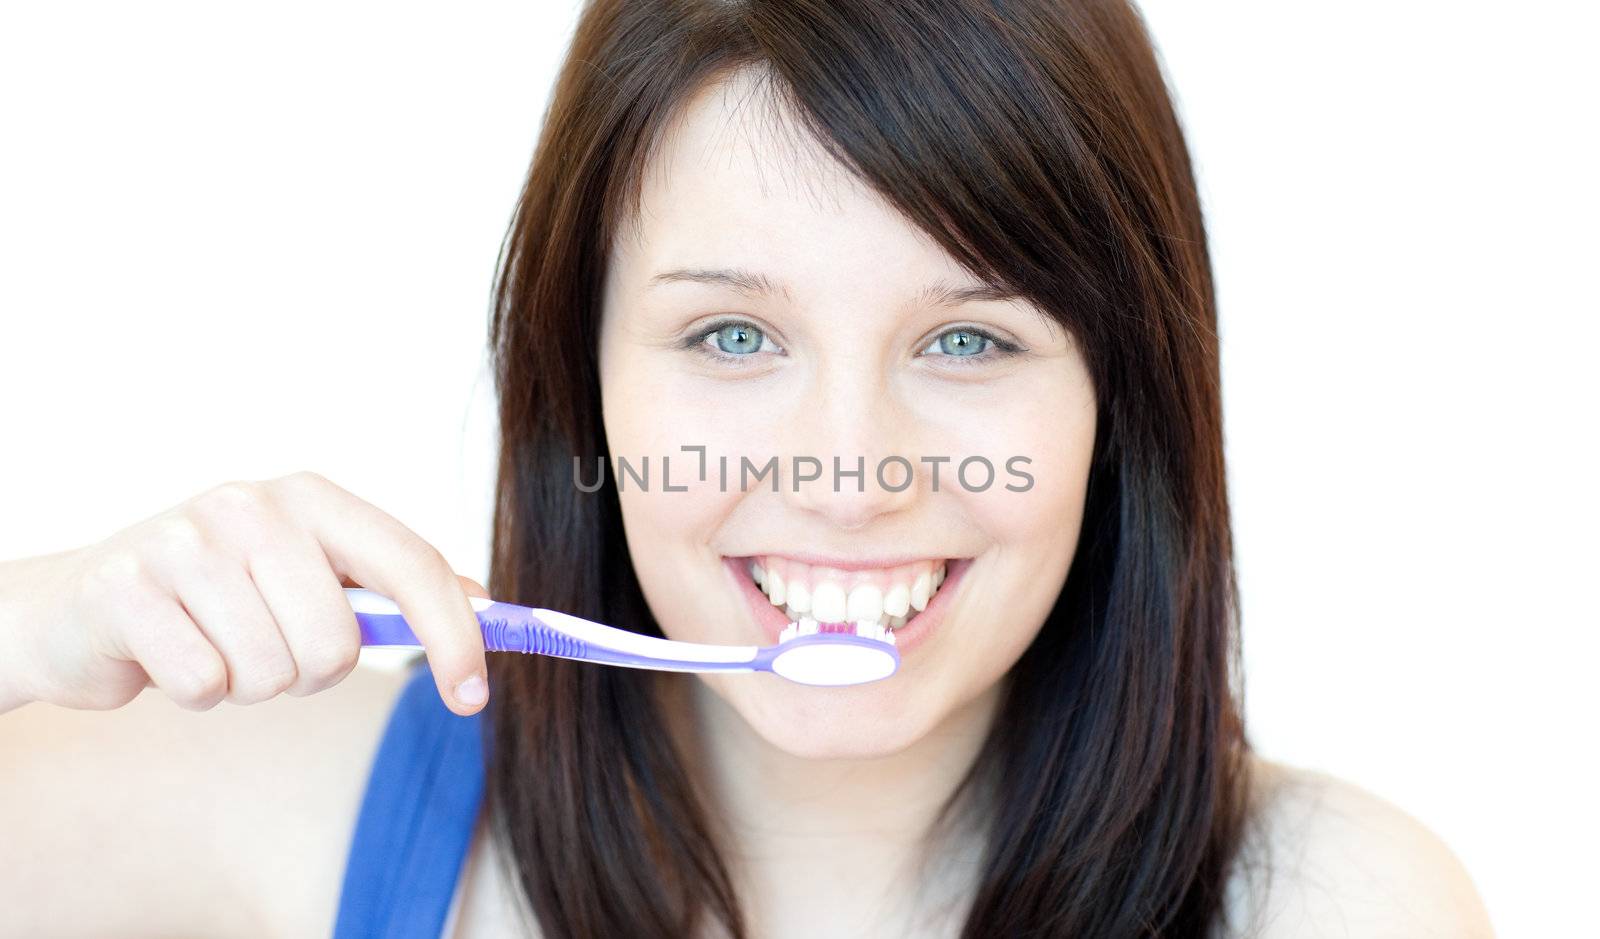 Smiling woman brushing her teeth against a white background